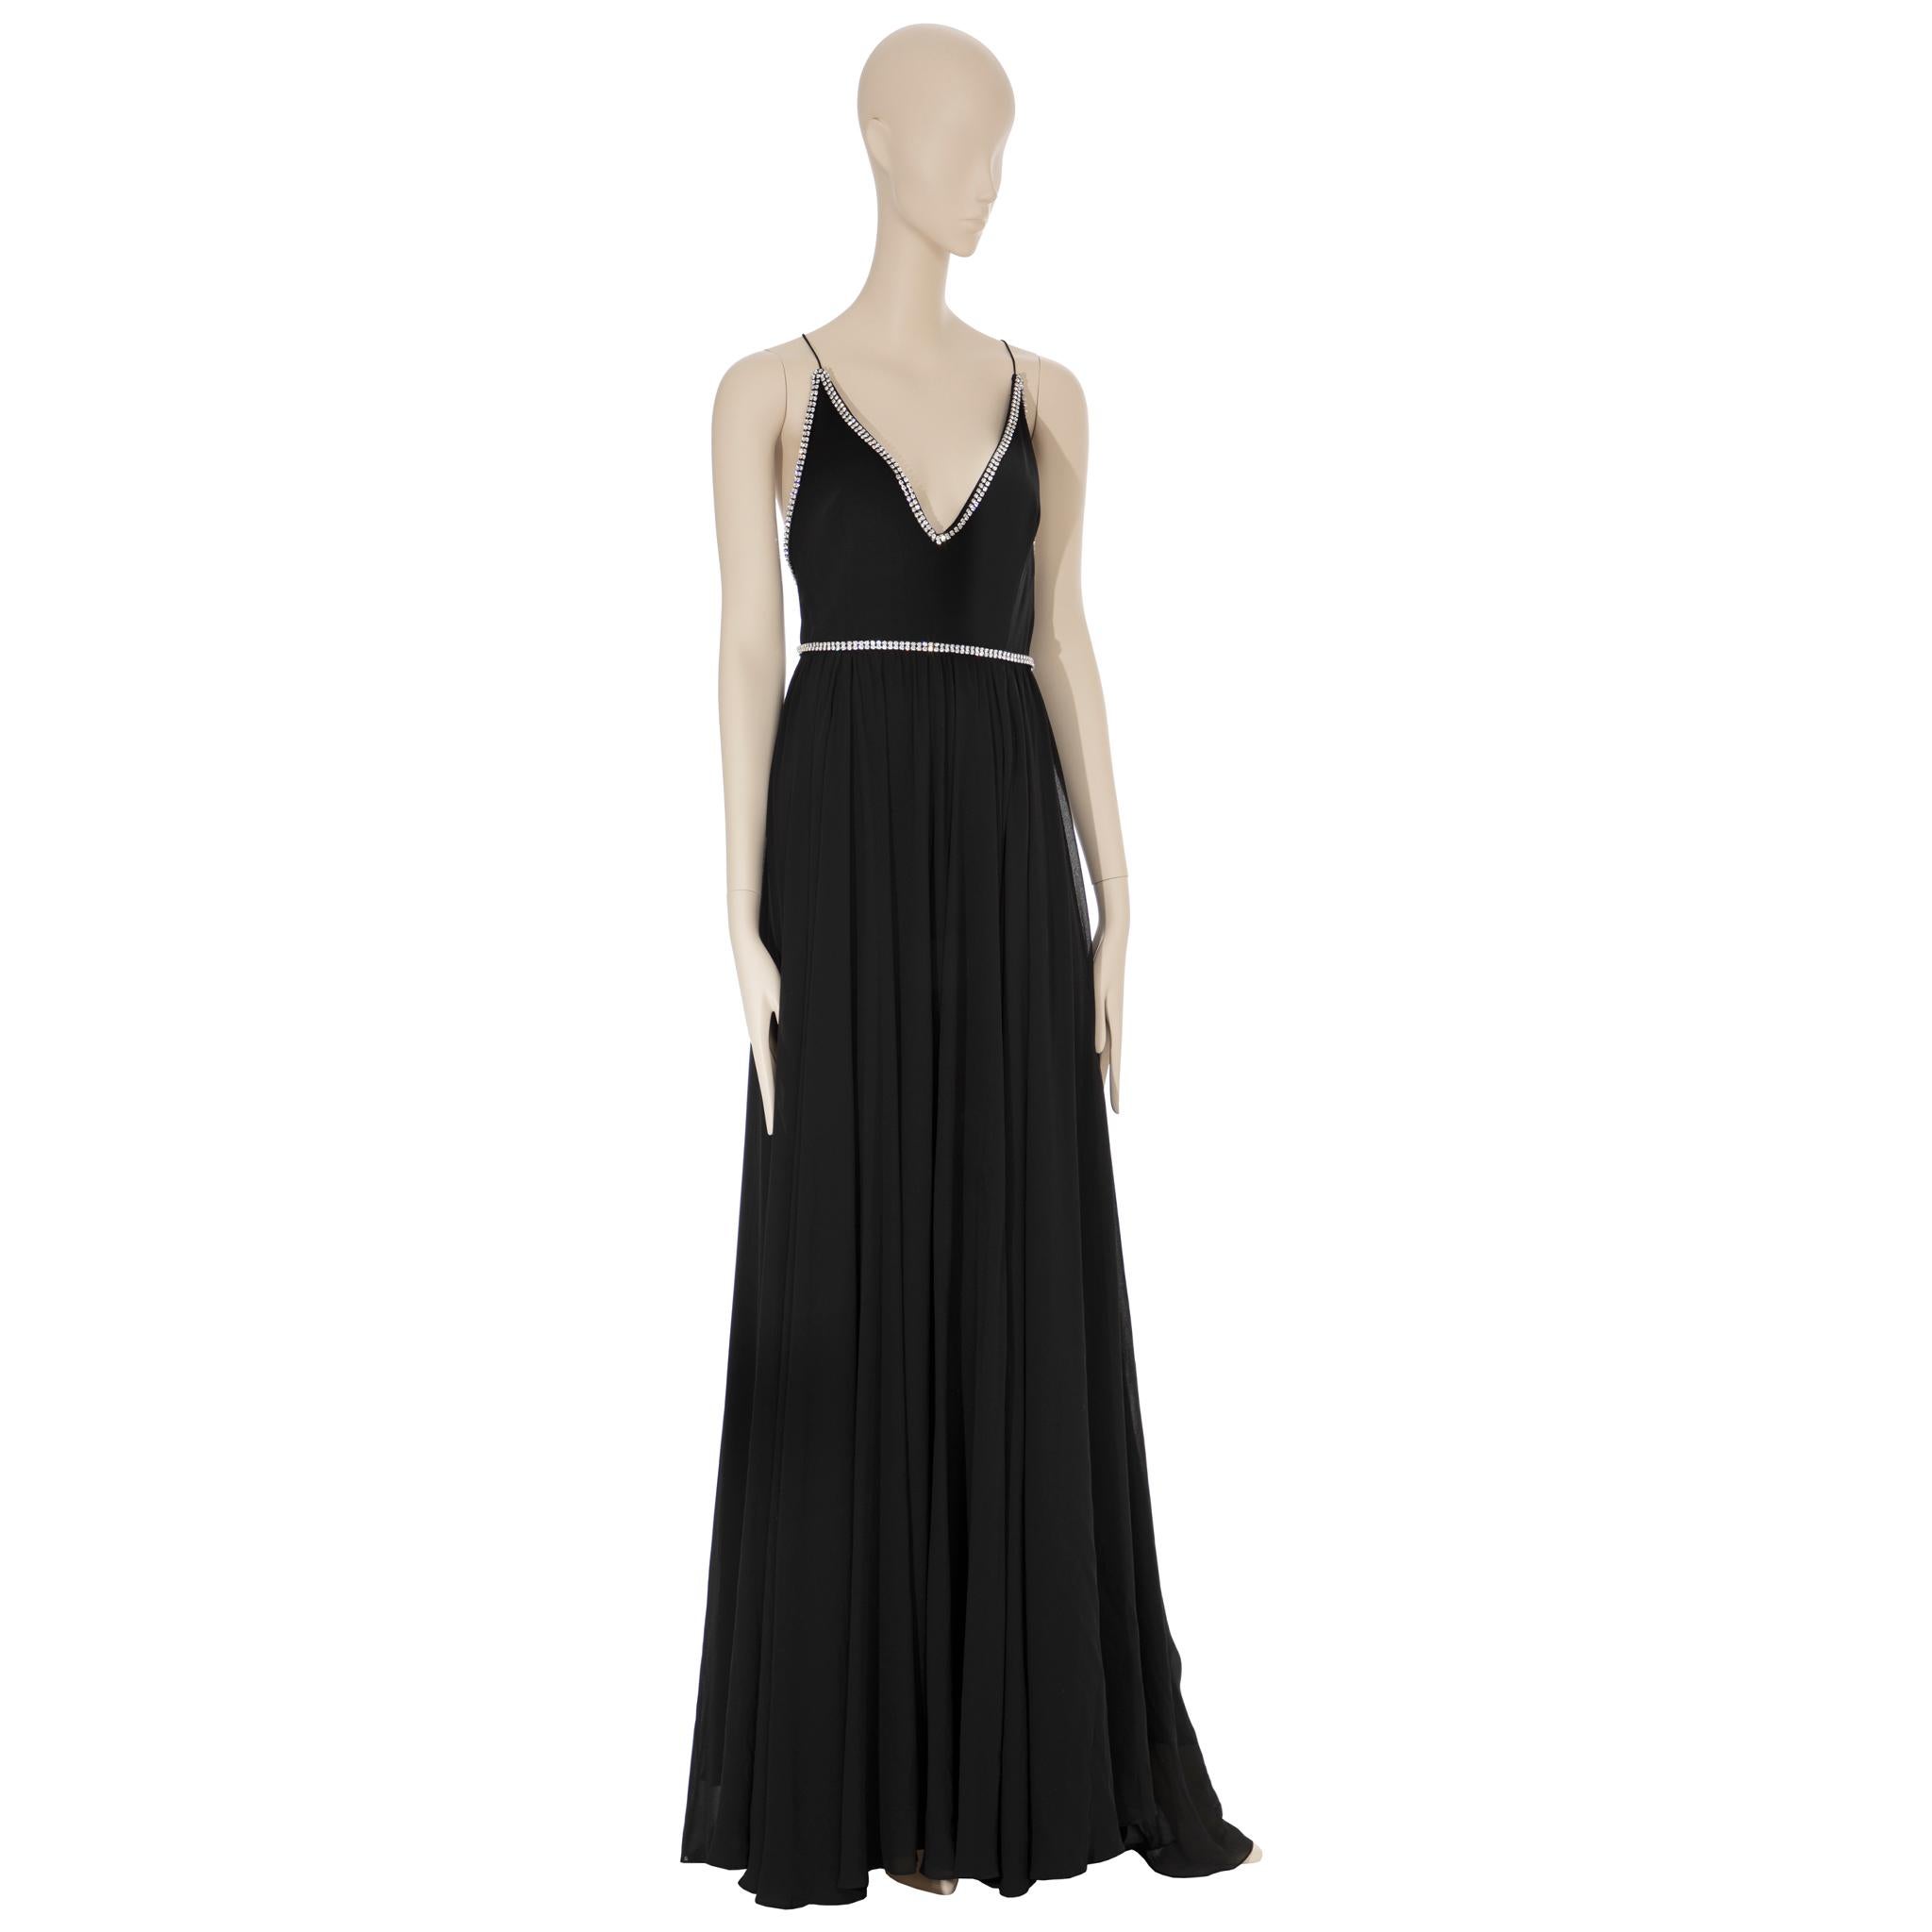 Saint Laurent Black Evening Gown With Crystal Details 38 FR In New Condition For Sale In DOUBLE BAY, NSW